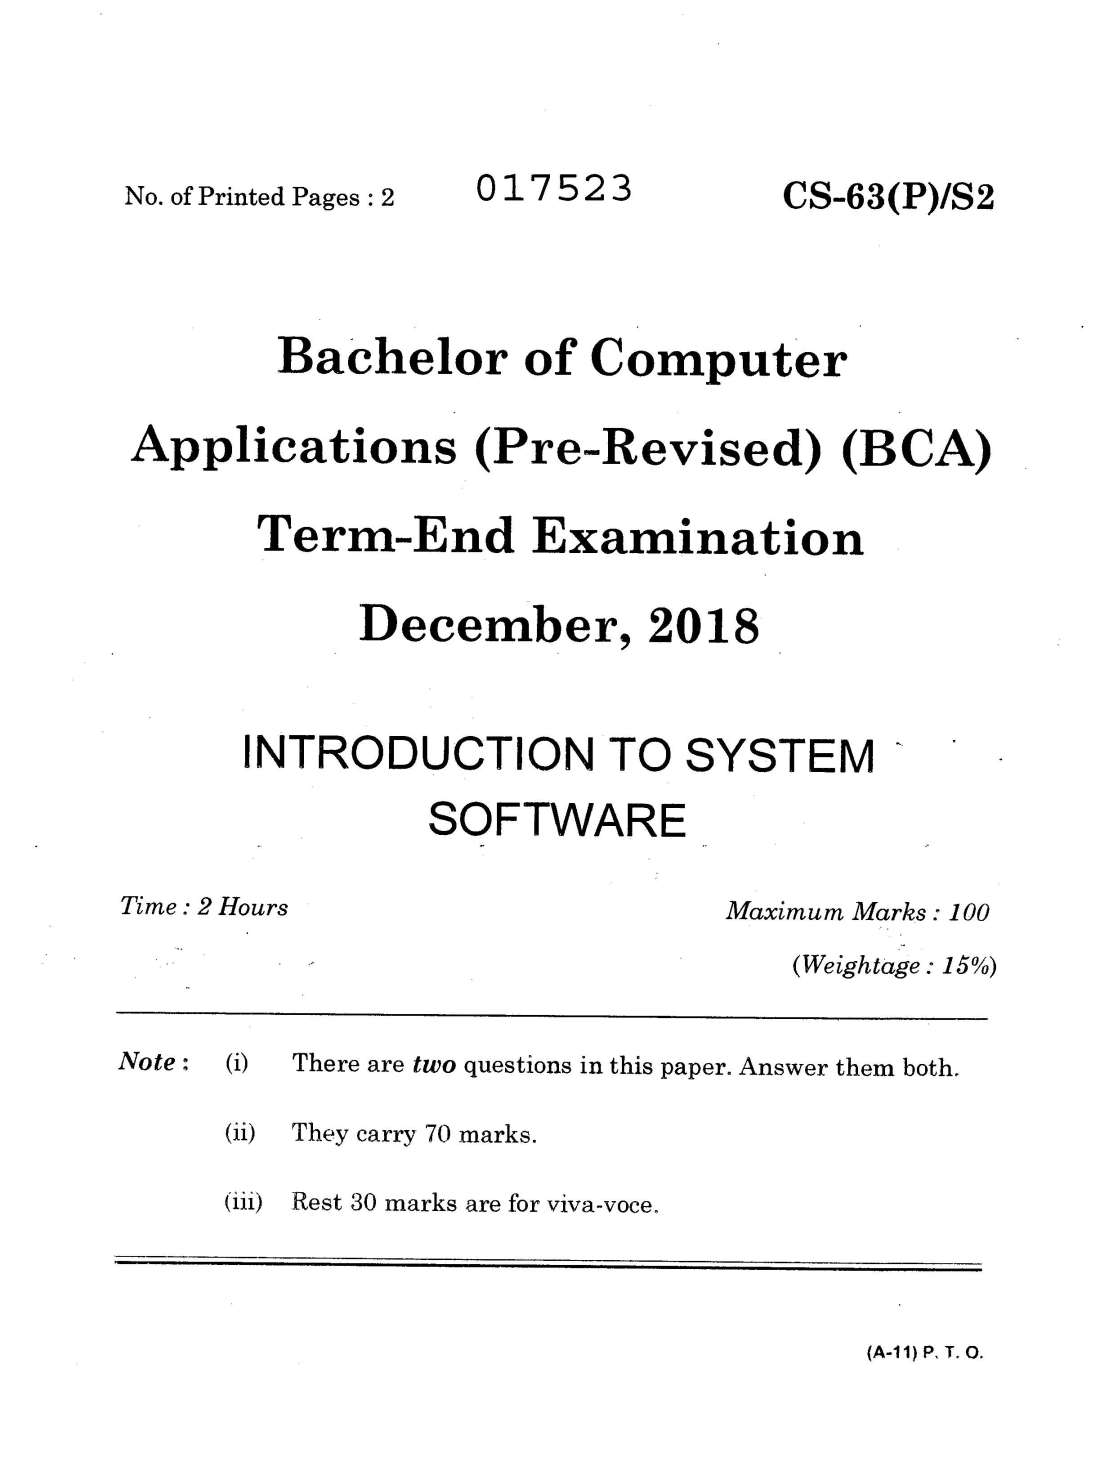 operating system research paper 2020